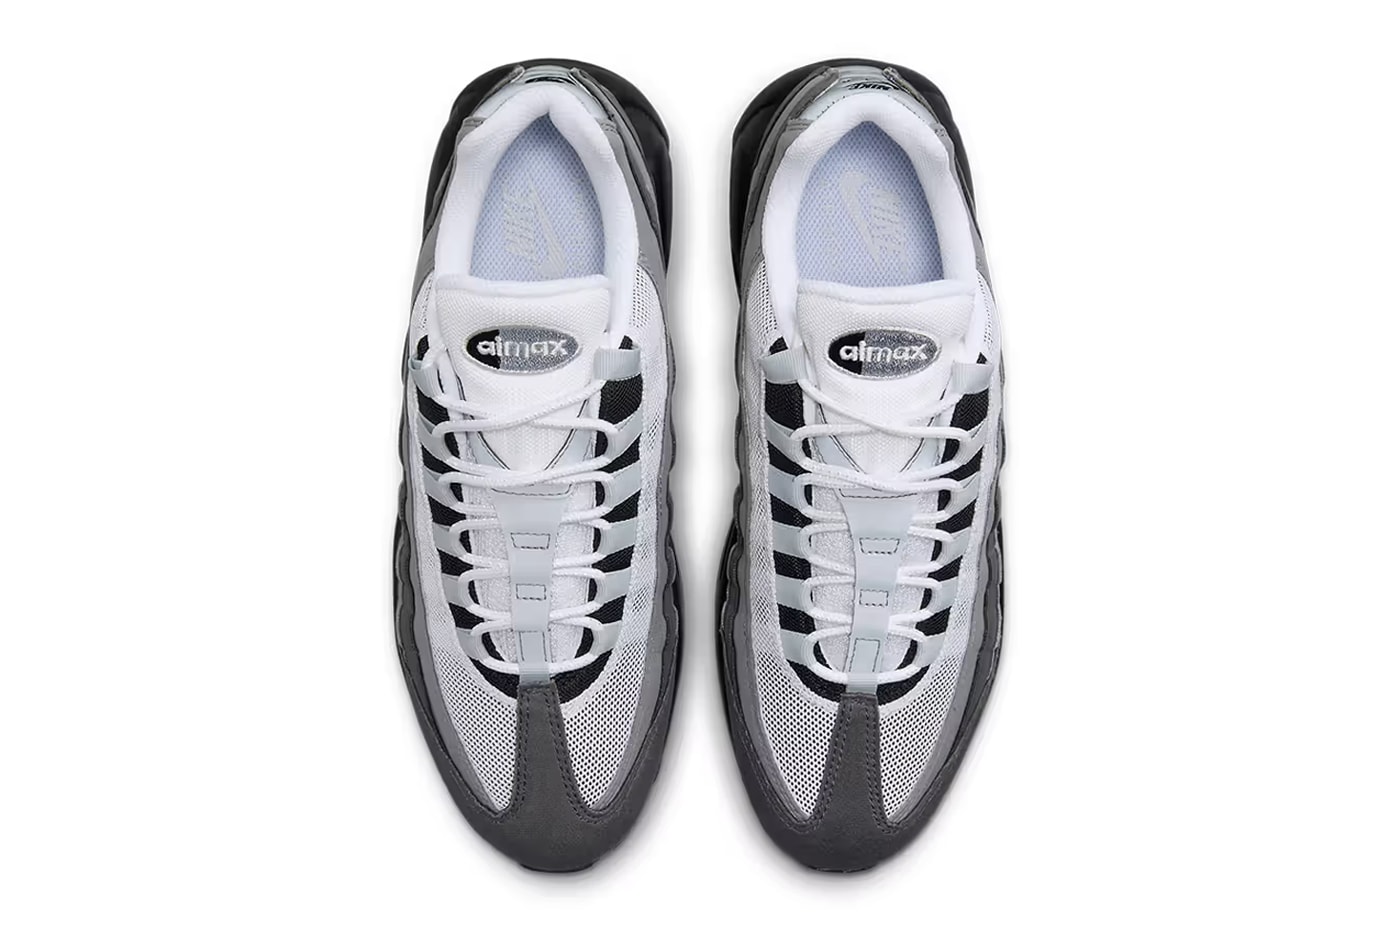 nike air max 95 jewel grey FQ1235 002 release date info store list buying guide photos price 